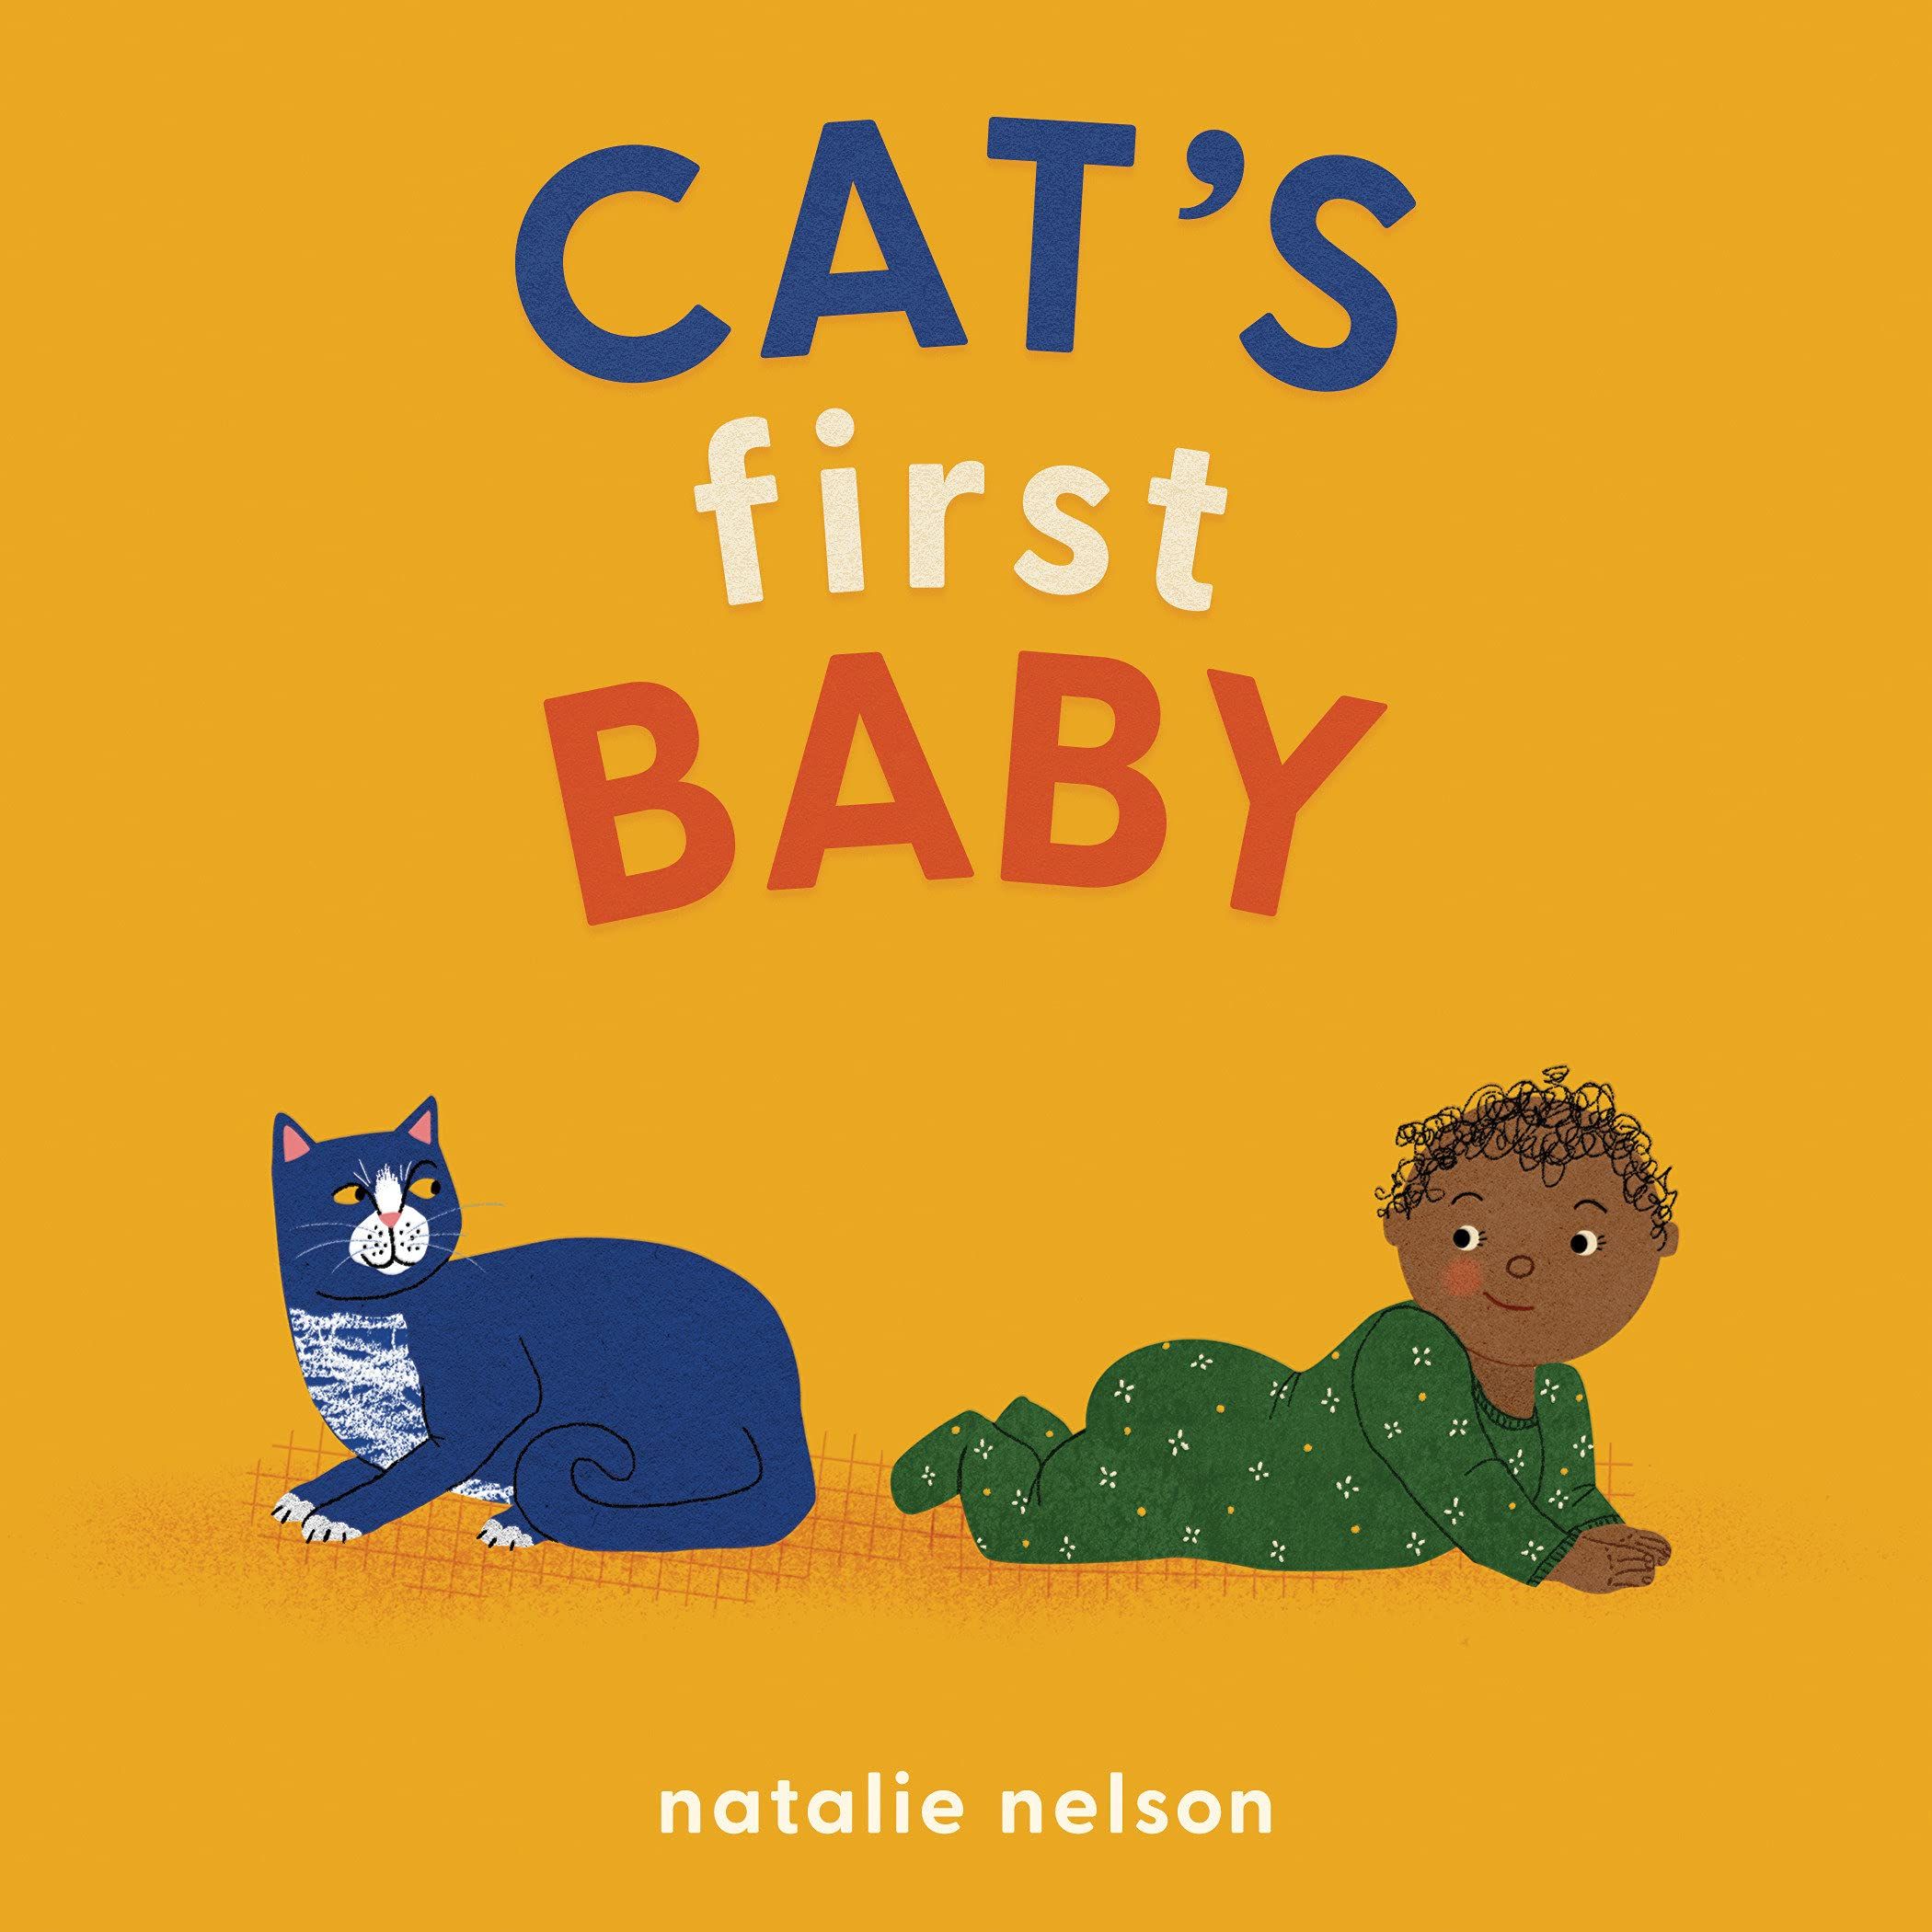 cat's first baby by natalie nelson book cover